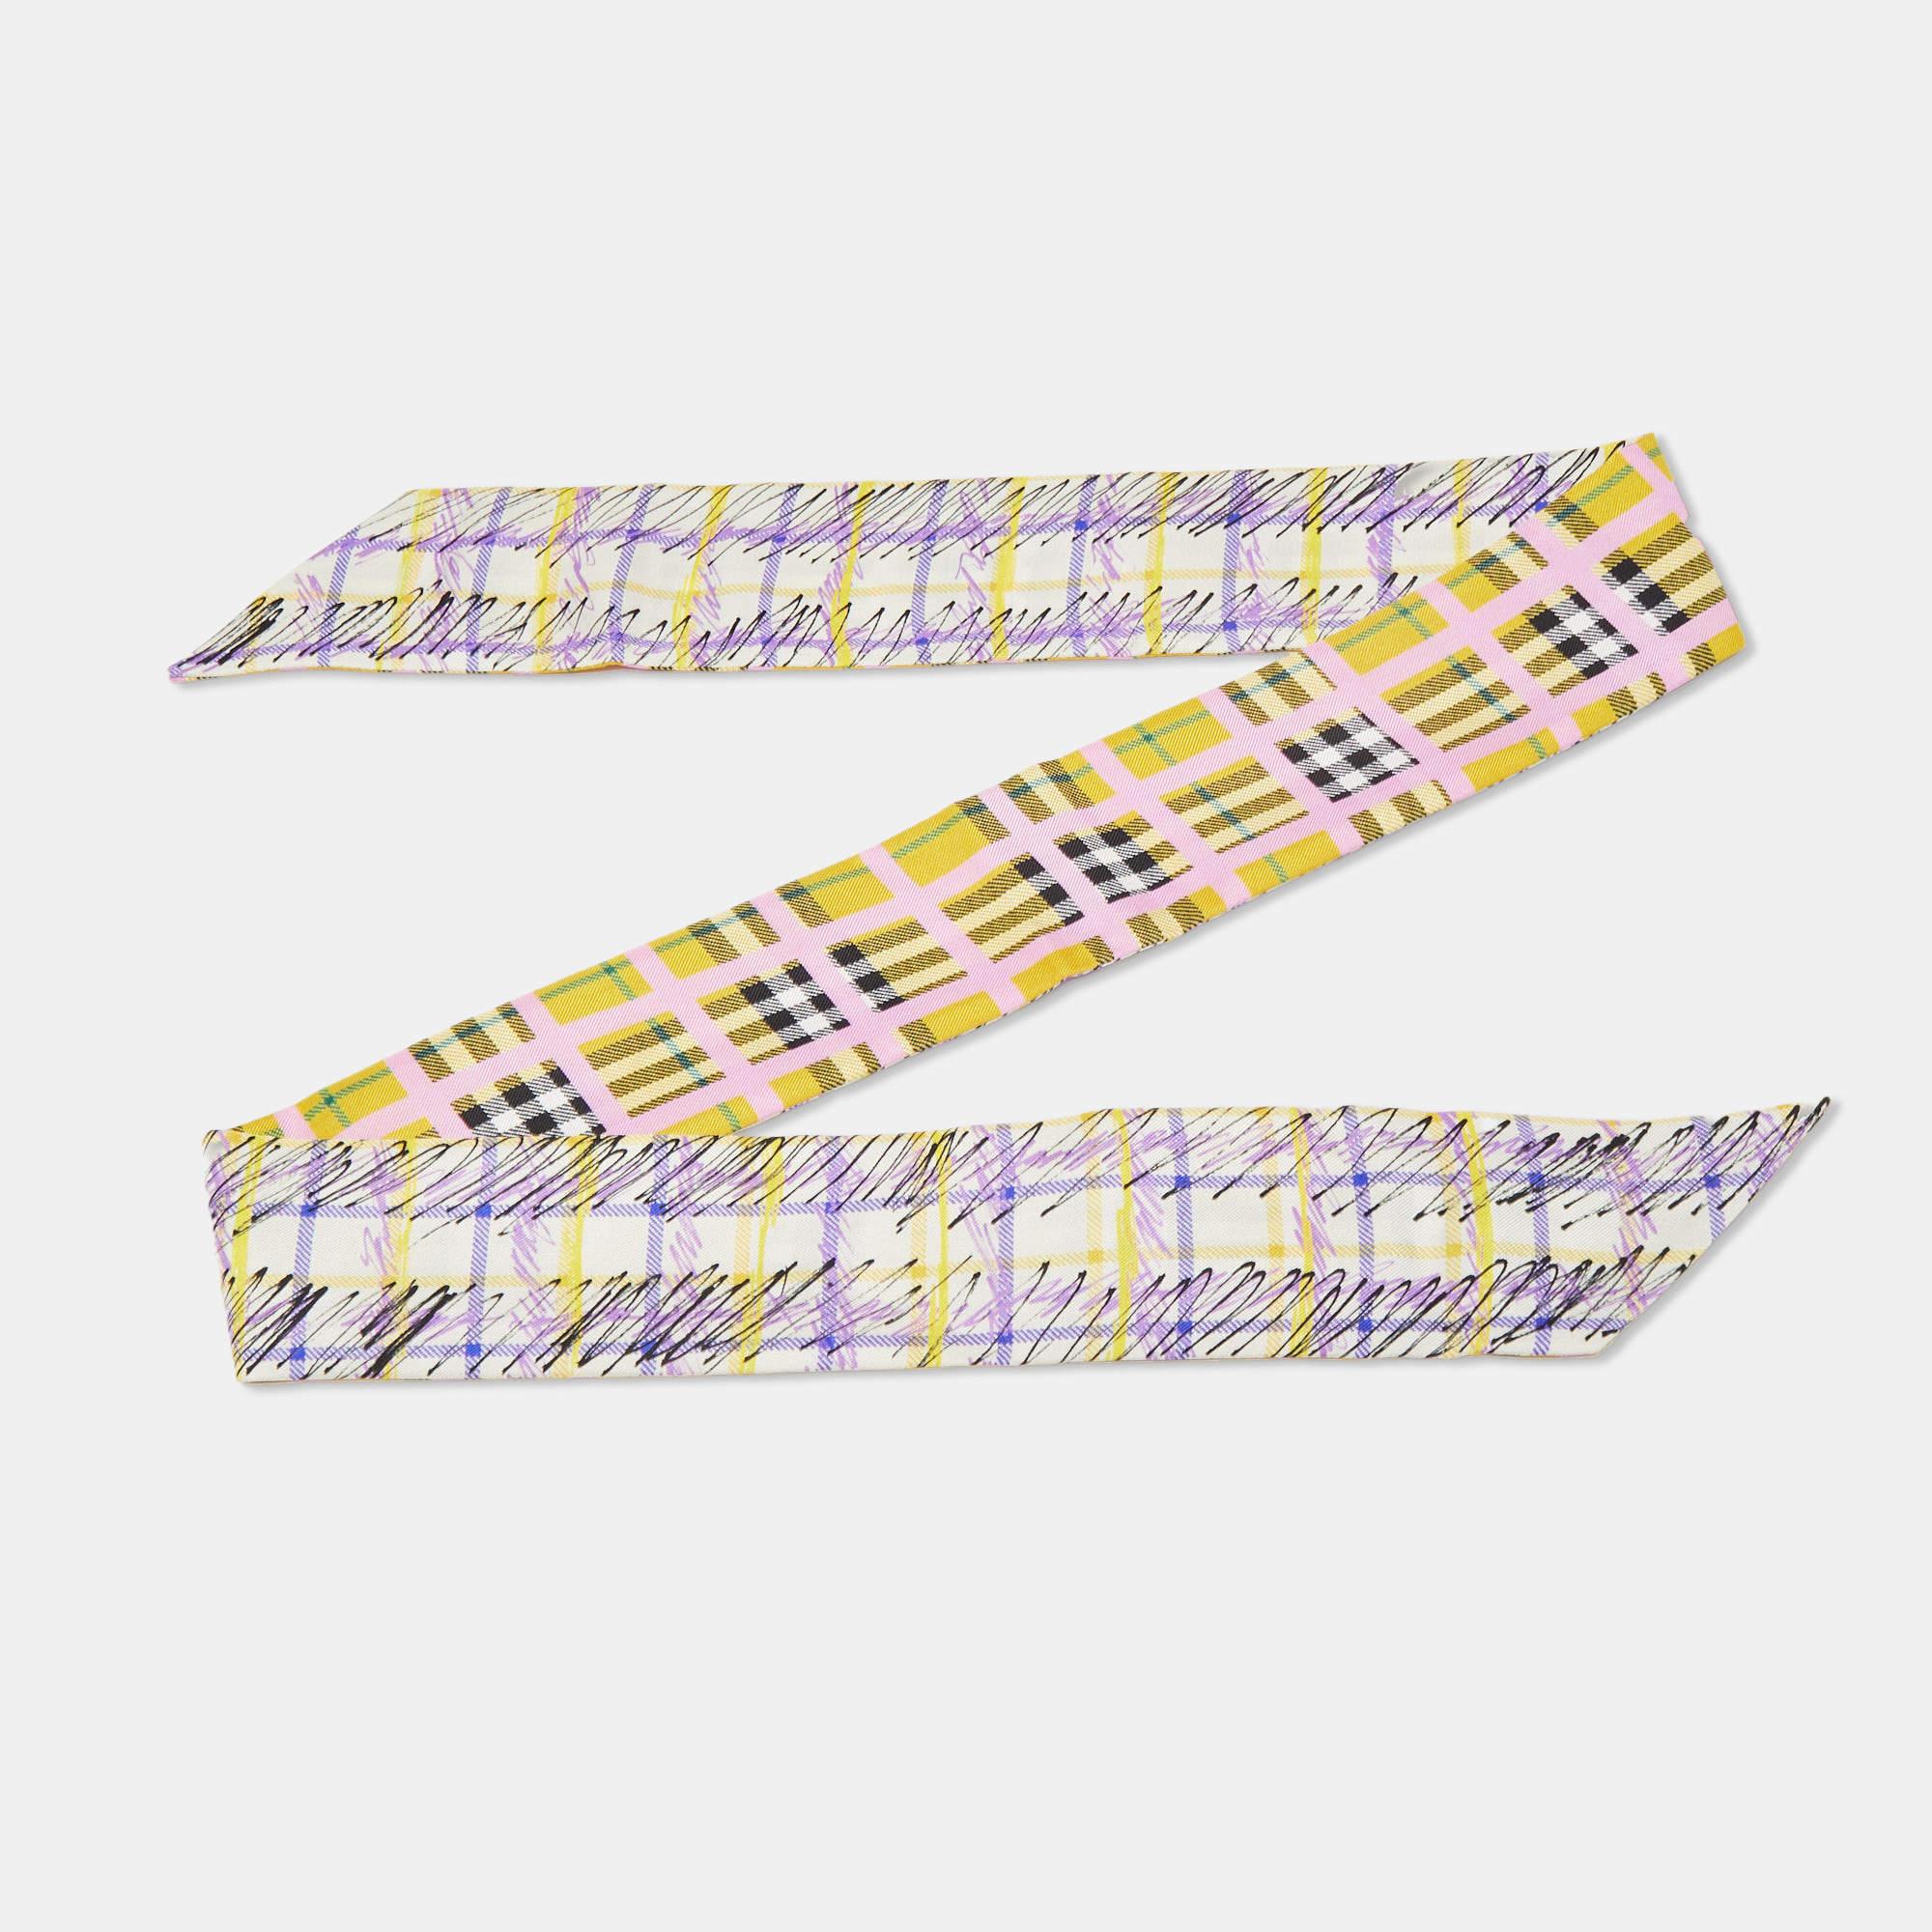 The Burberry twilly is a luxurious fashion accessory made from high-quality silk. It features a vibrant and intricate print, creating a visually stunning and eye-catching design. This twilly is versatile, serving as a scarf, headband, or belt,